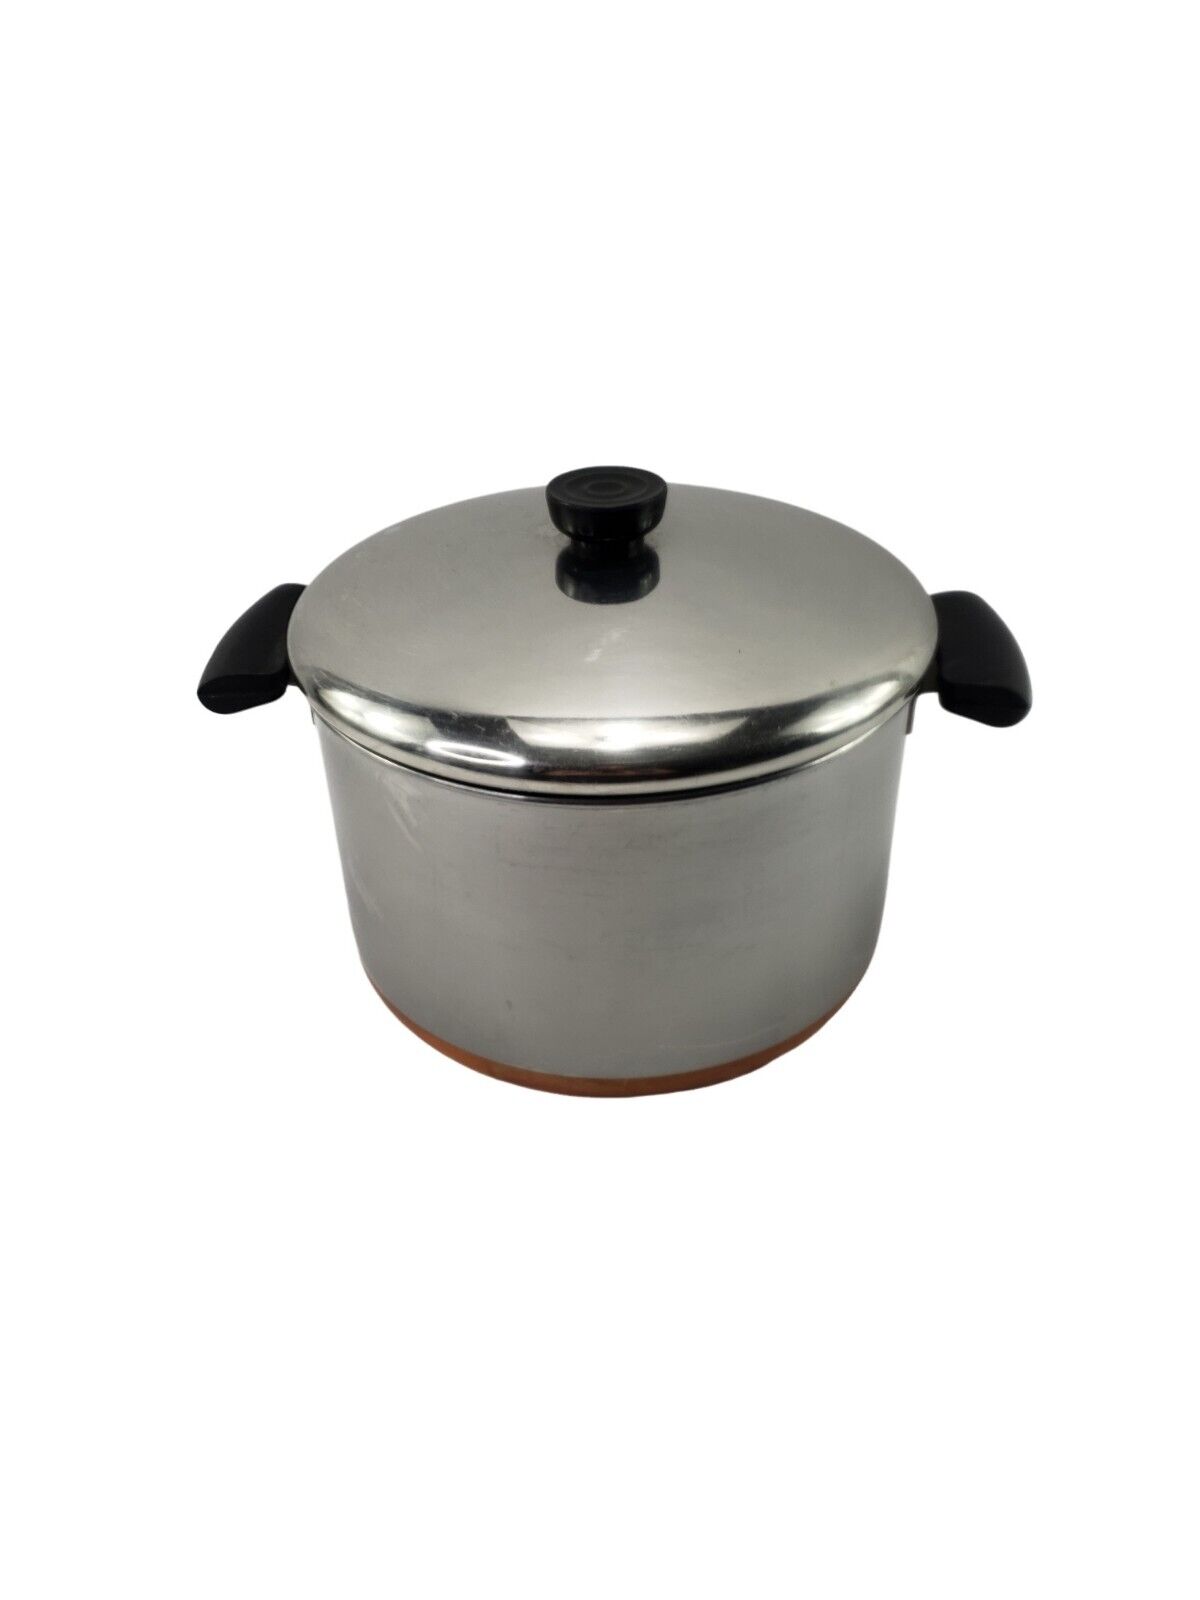 Revere Ware Stock Pot Under Process Patent w Lid Stainless Steel Copper Bottom